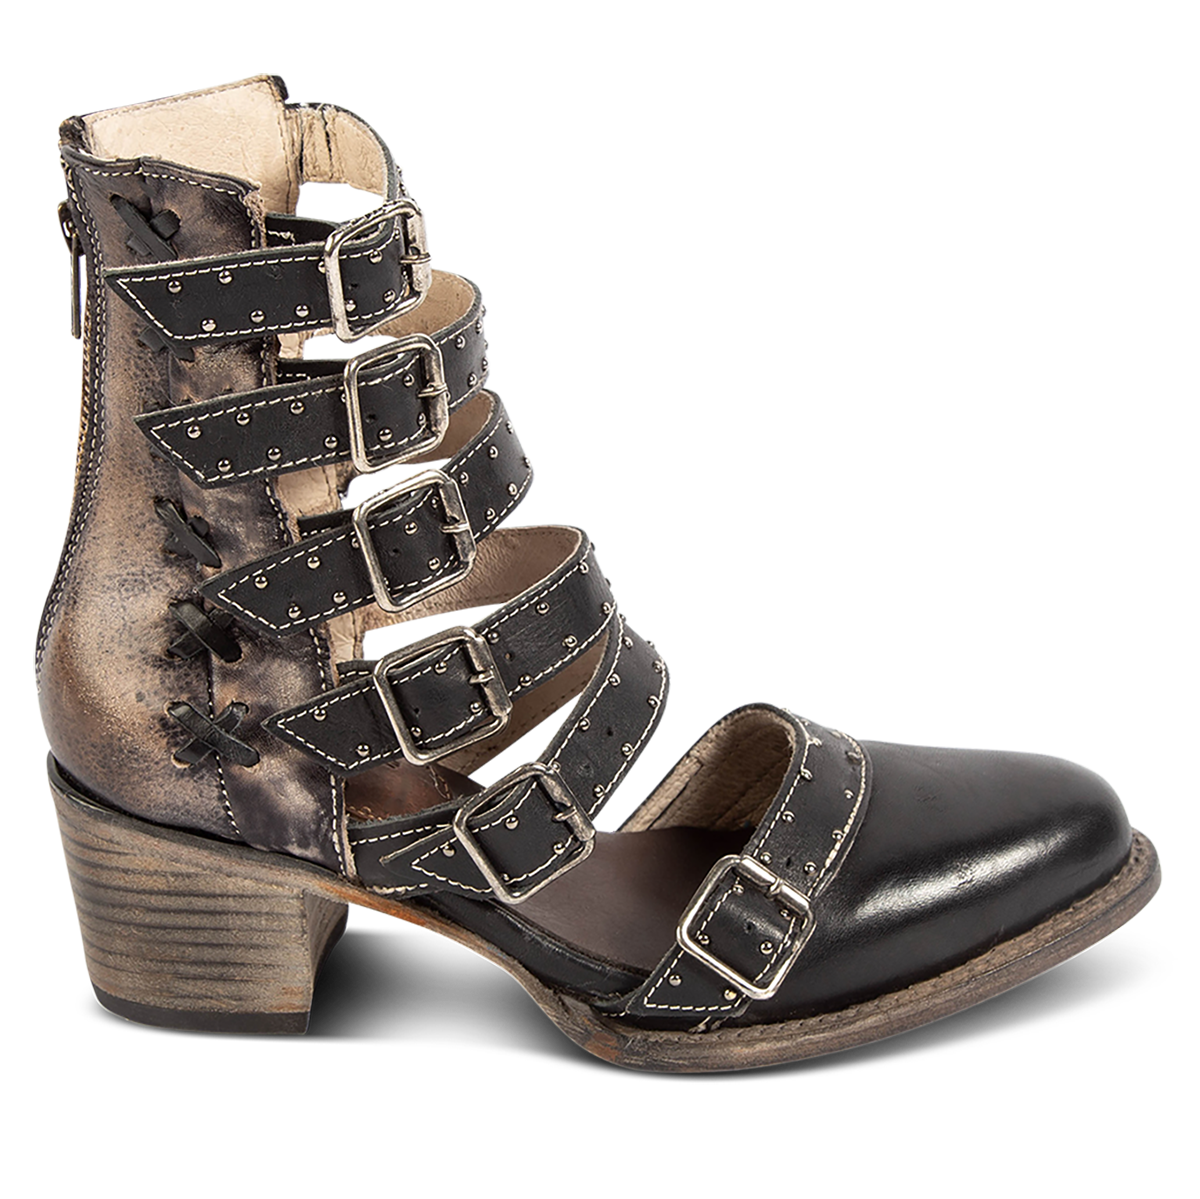 FREEBIRD women's Salty black leather bootie with adjustable leather straps, a low block heel and an almond toe